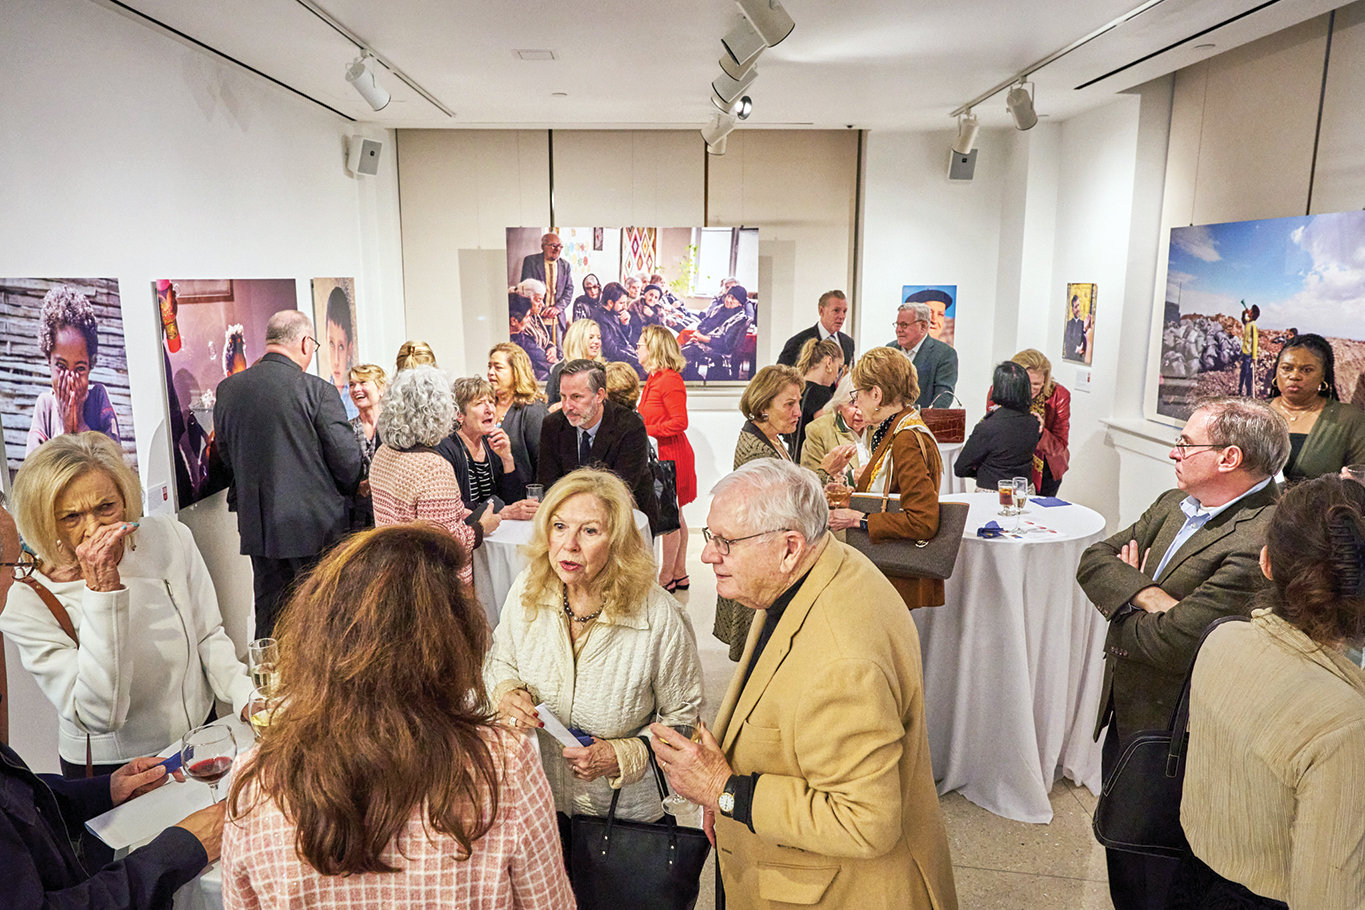 A crowd at the Sheen Center for Thought & Culture in Lower Manhattan views the Nov. 1 photo exhibit, “And who is my neighbor? The faces of CNEWA.” Photographers captured the images revealing the innate dignity and beauty of every person while on assignment for Catholic Near East Welfare Association (CNEWA) in the Middle East, Northeast Africa, India and Eastern Europe.